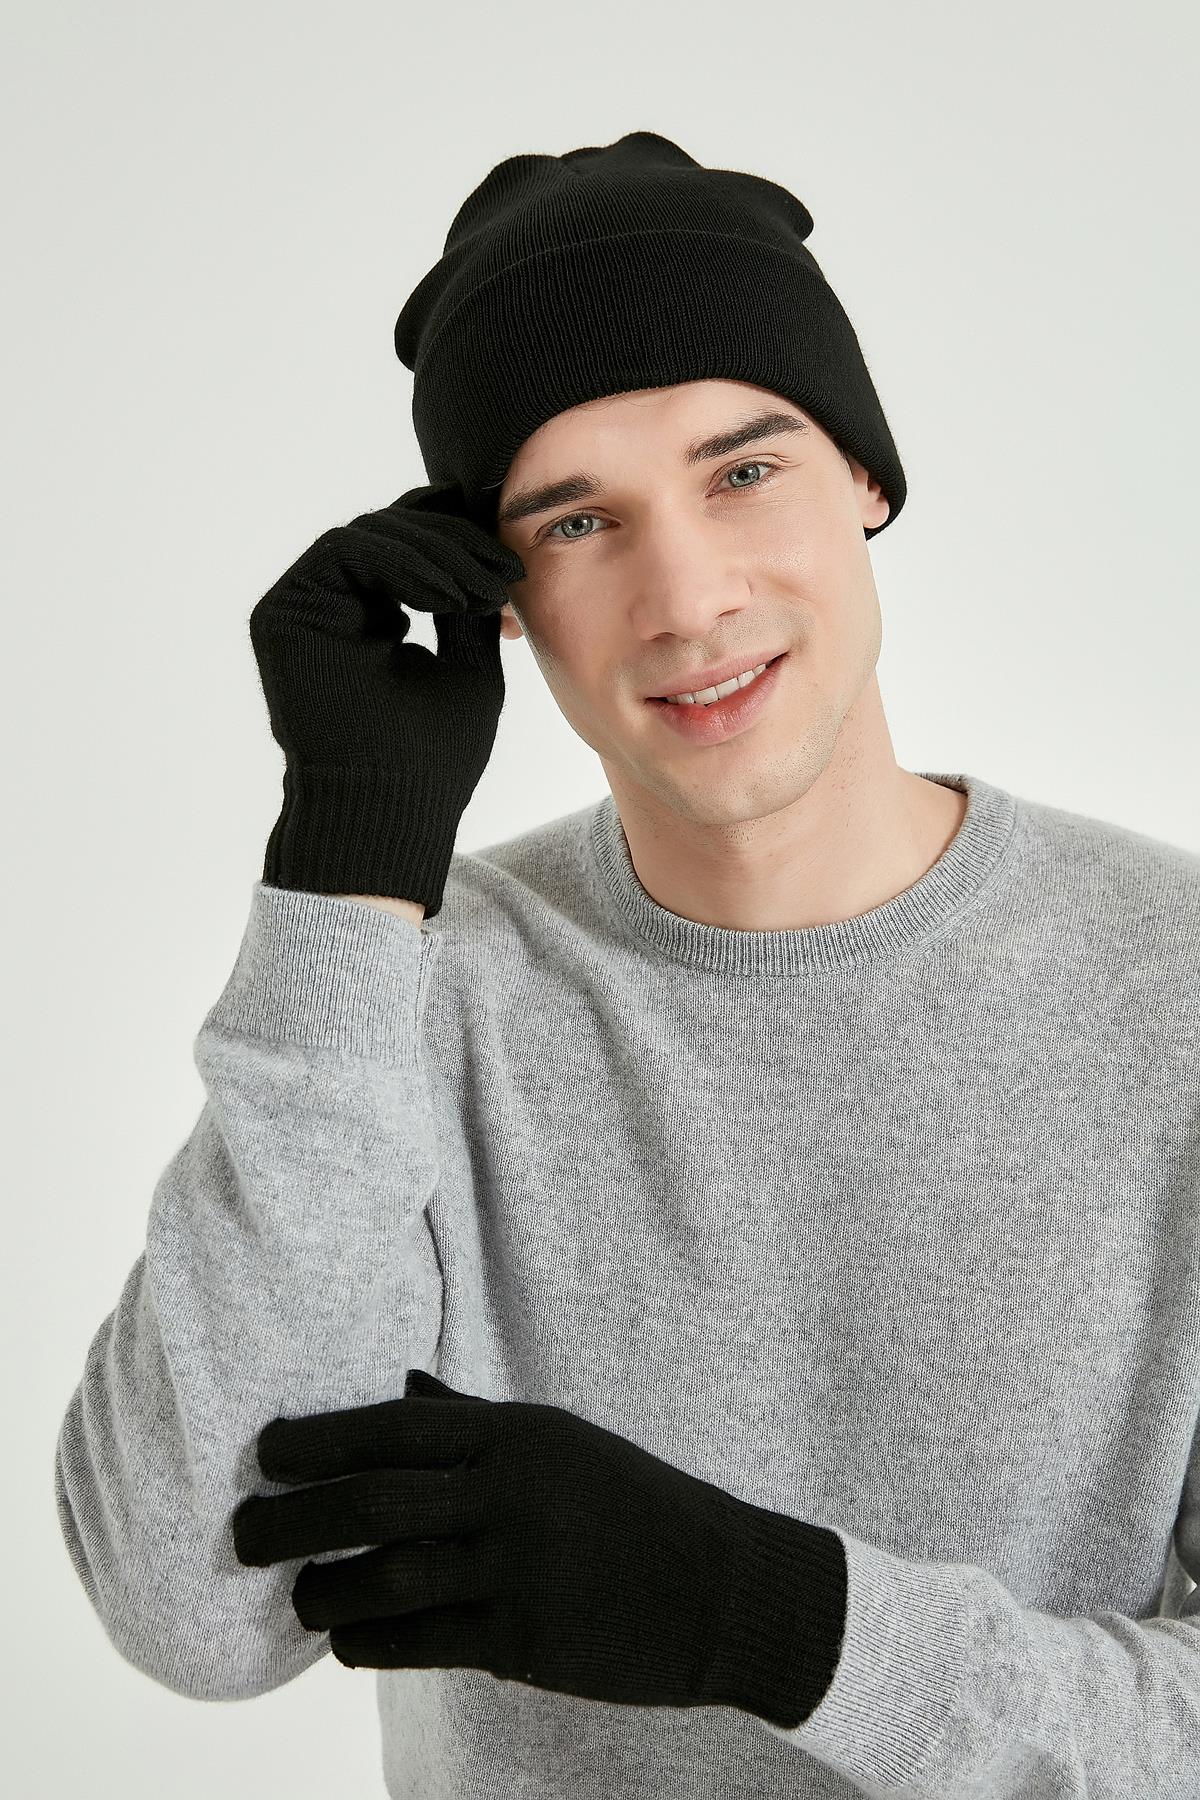 A model wears NSV11226 - Beret Gloves Set Of 2 - Black, wholesale Glove of Nesvay to display at Lonca